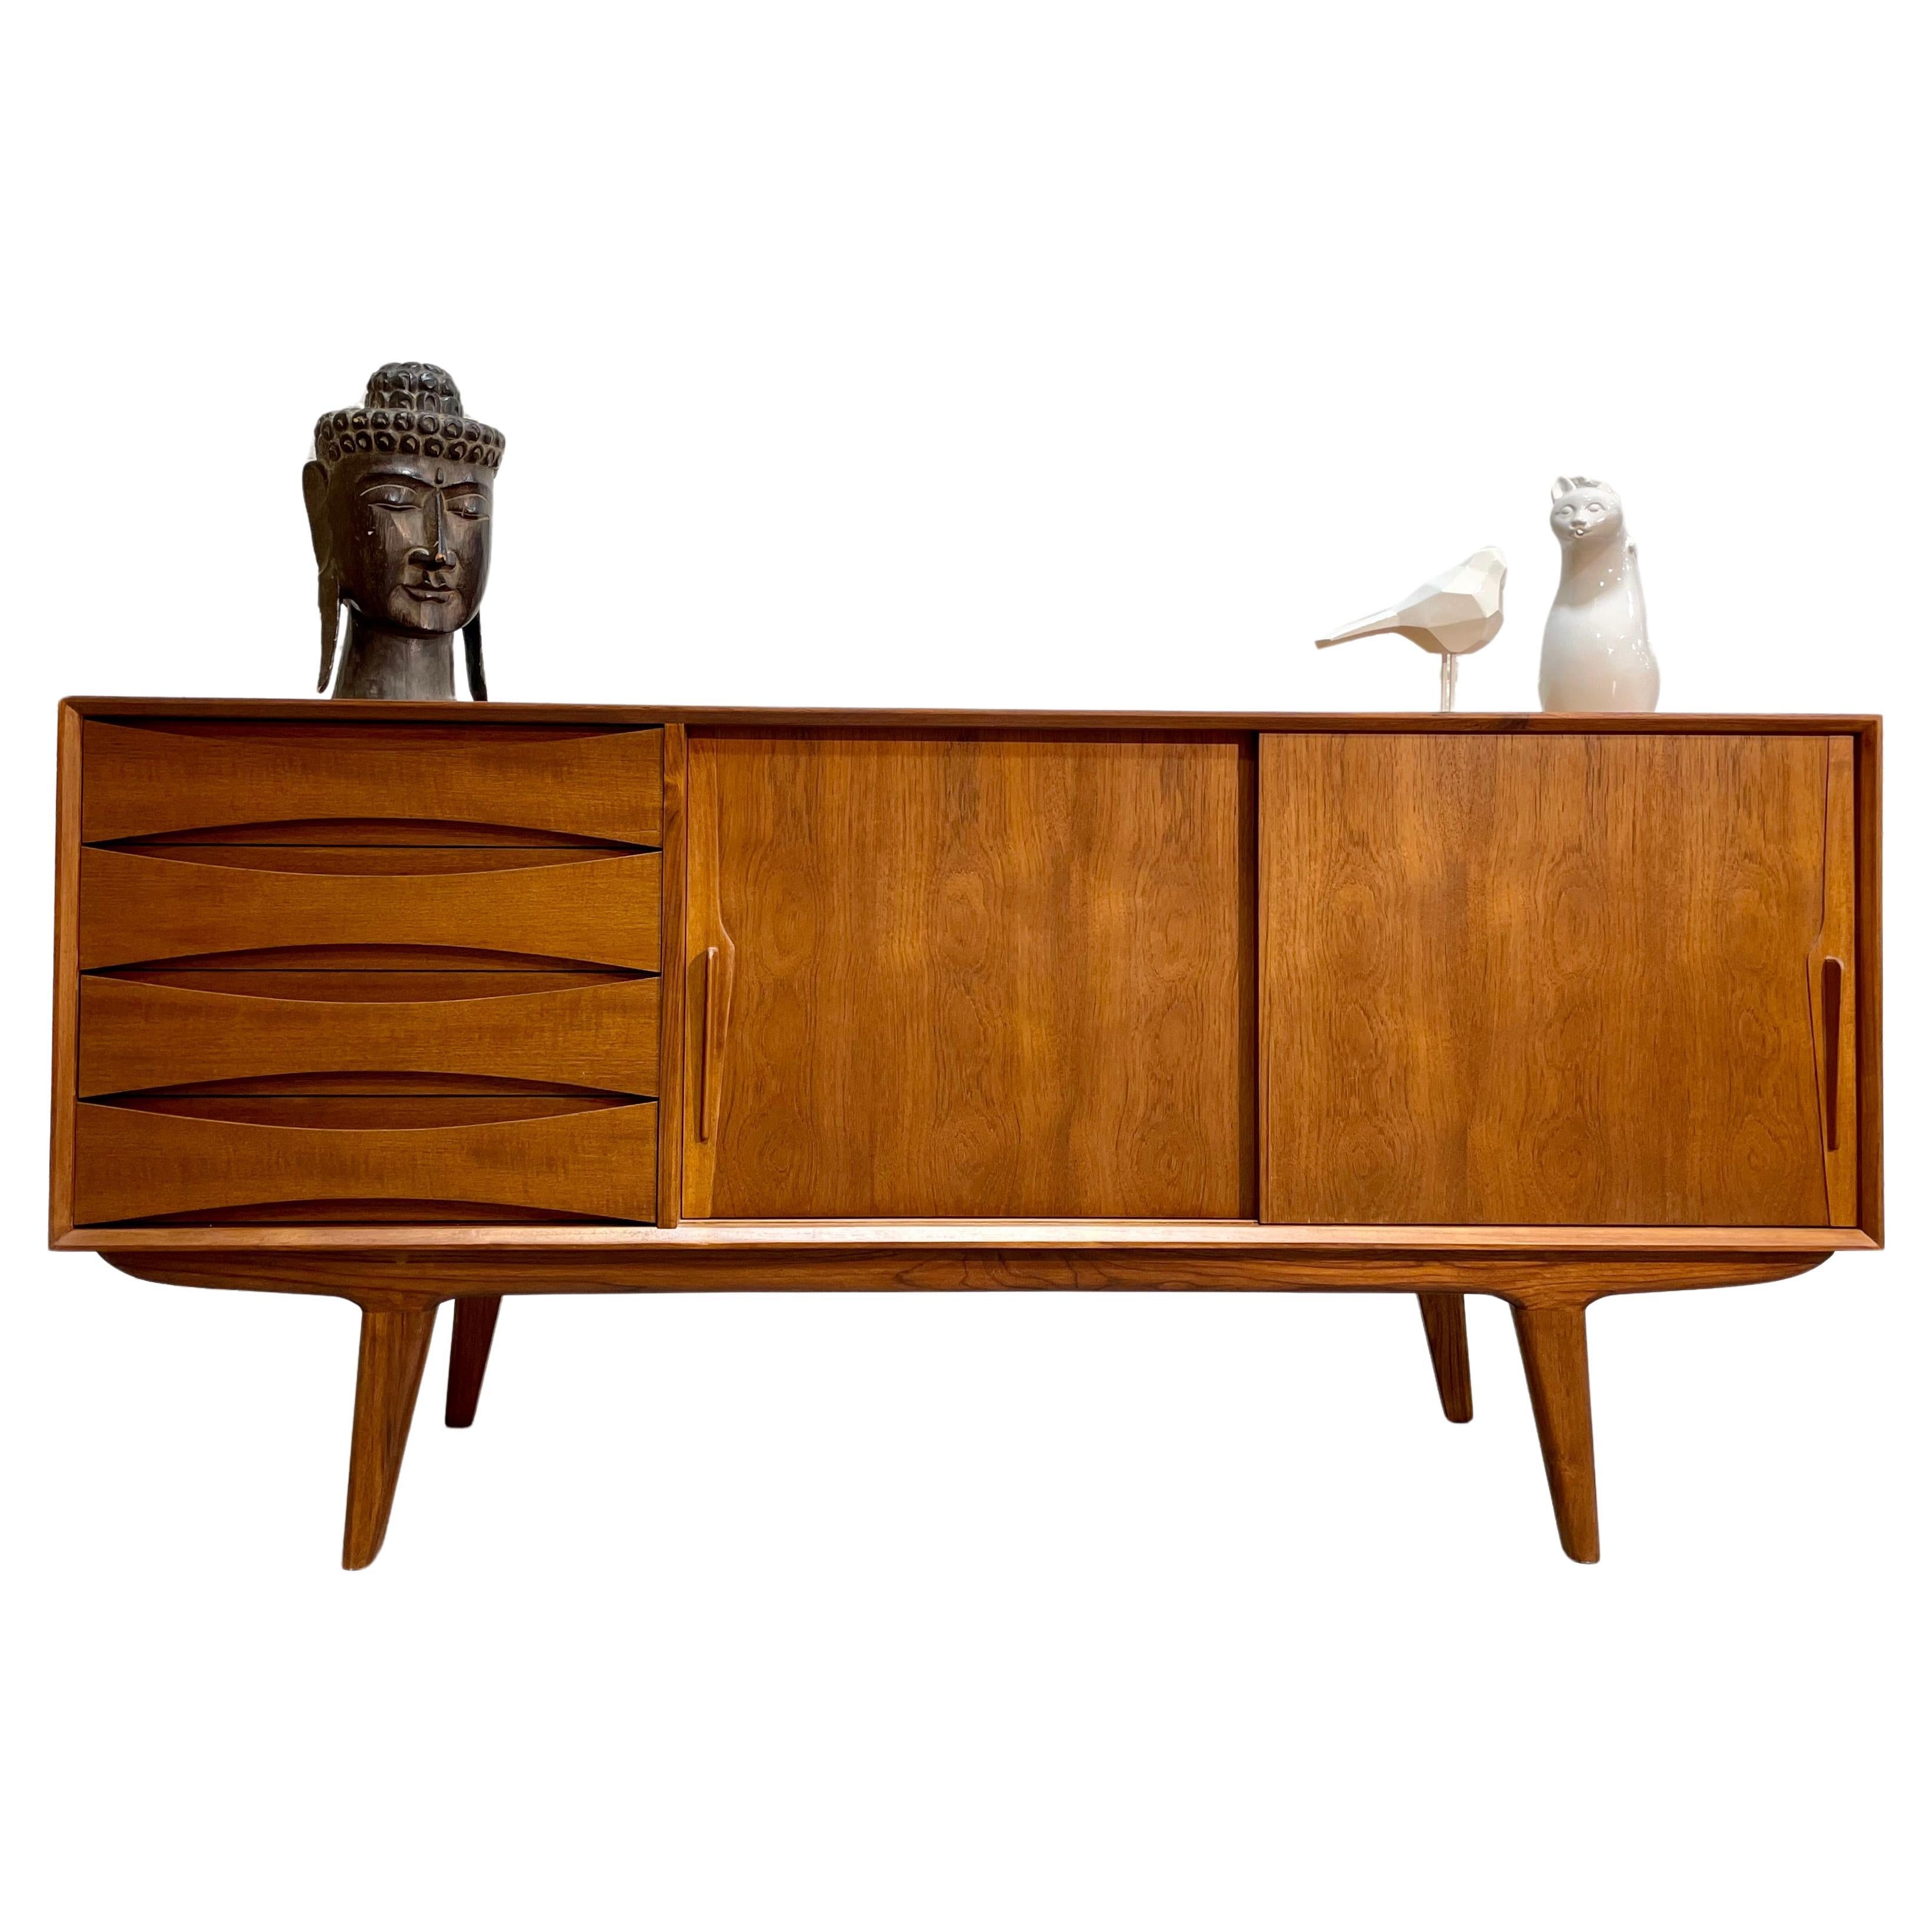  Handsome Mid Century MODERN styled SIDEBOARD / CREDENZA media stand For Sale